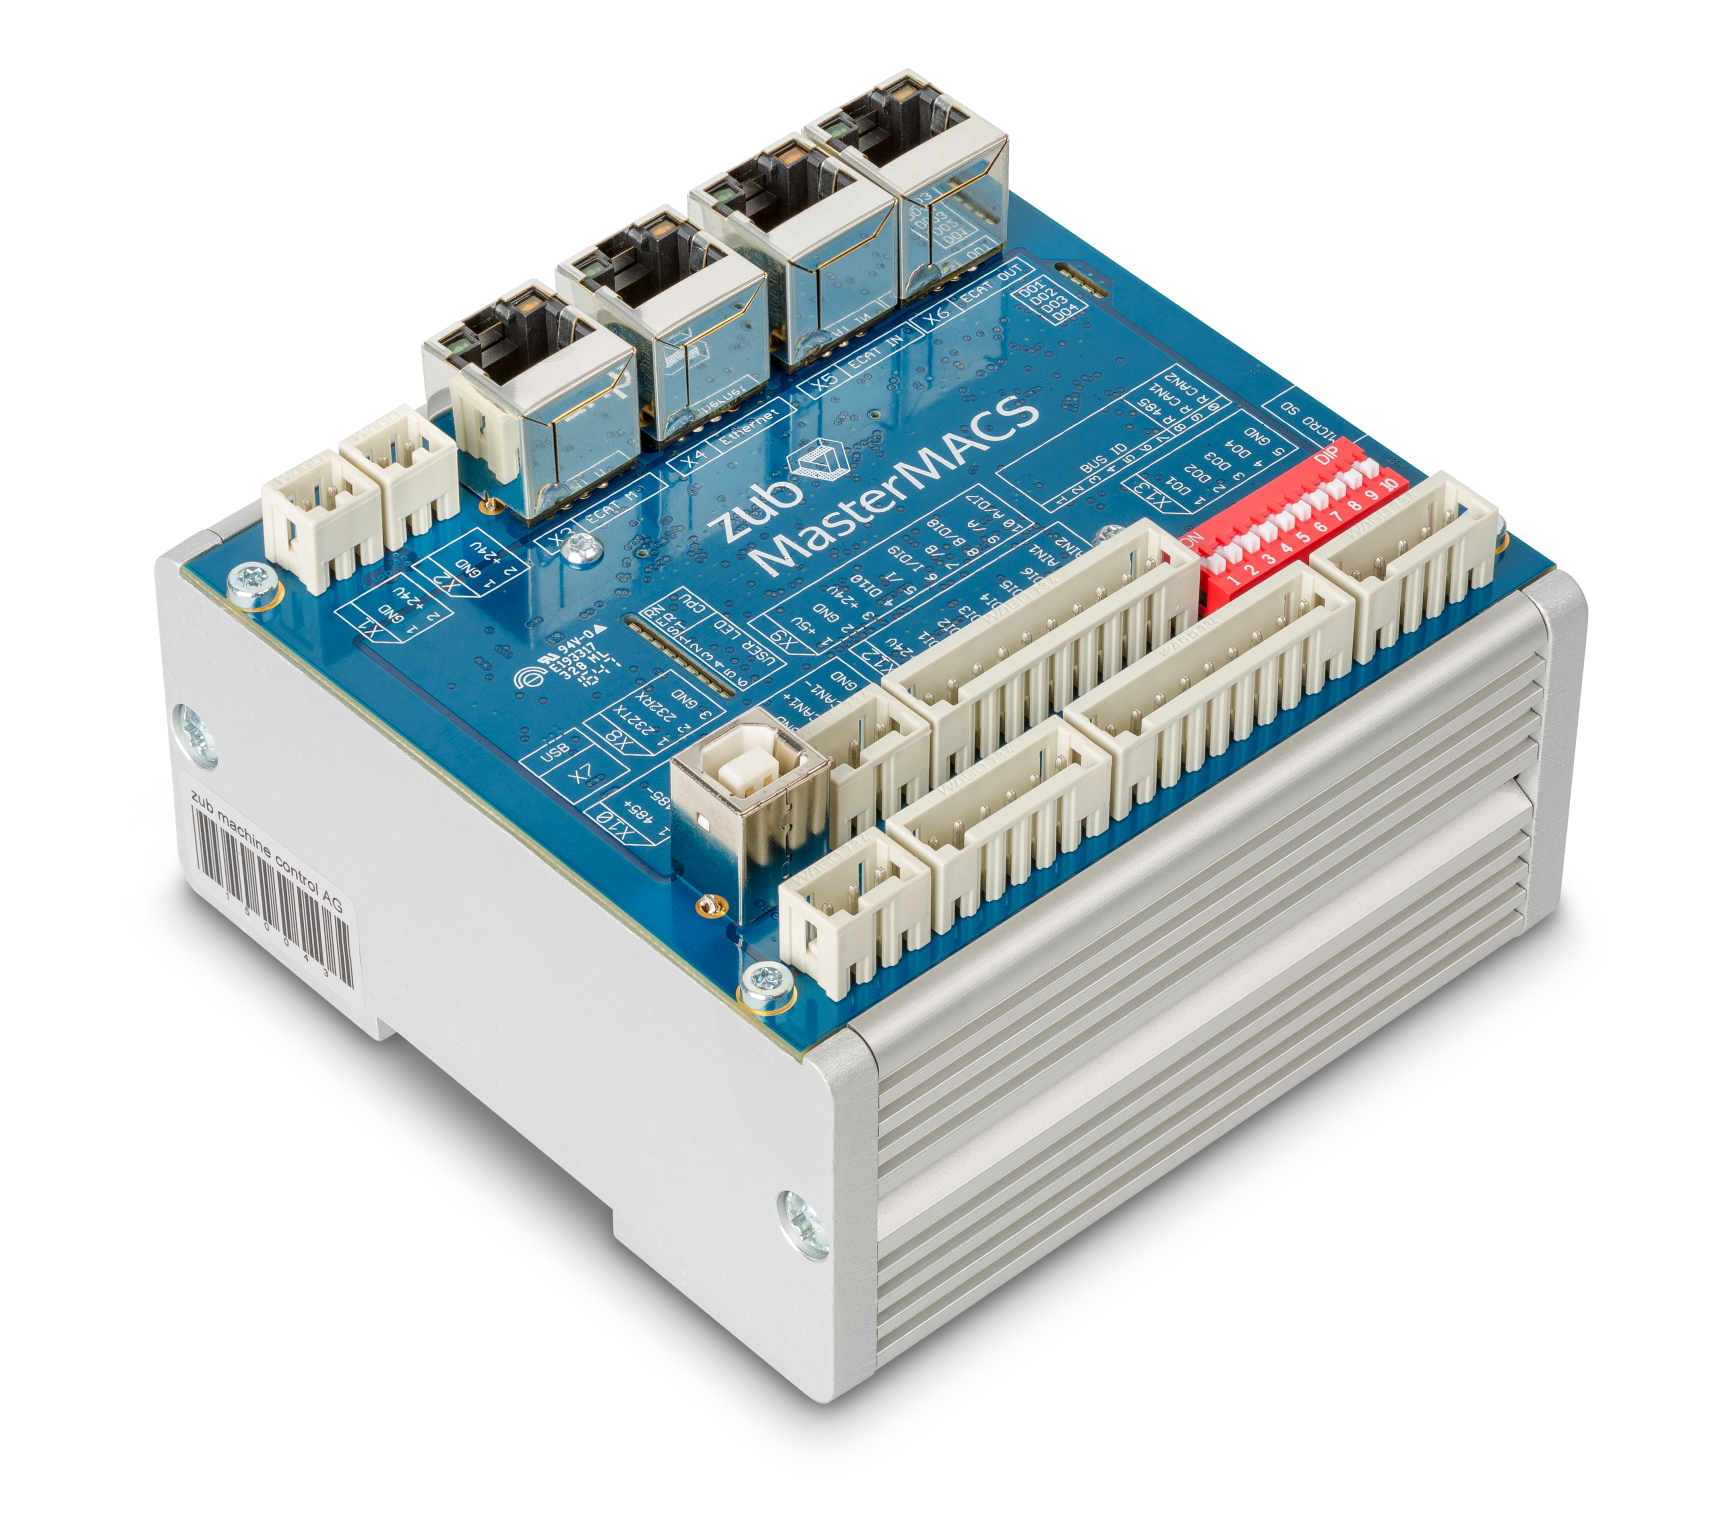 The ESCON is a speed and current controller that is commanded by analog and digital signals, and the EPOS is a CANOpen slave, that requires a master controller via a variety of communication protocols, including CAN, EtherCAT, USB and RS232